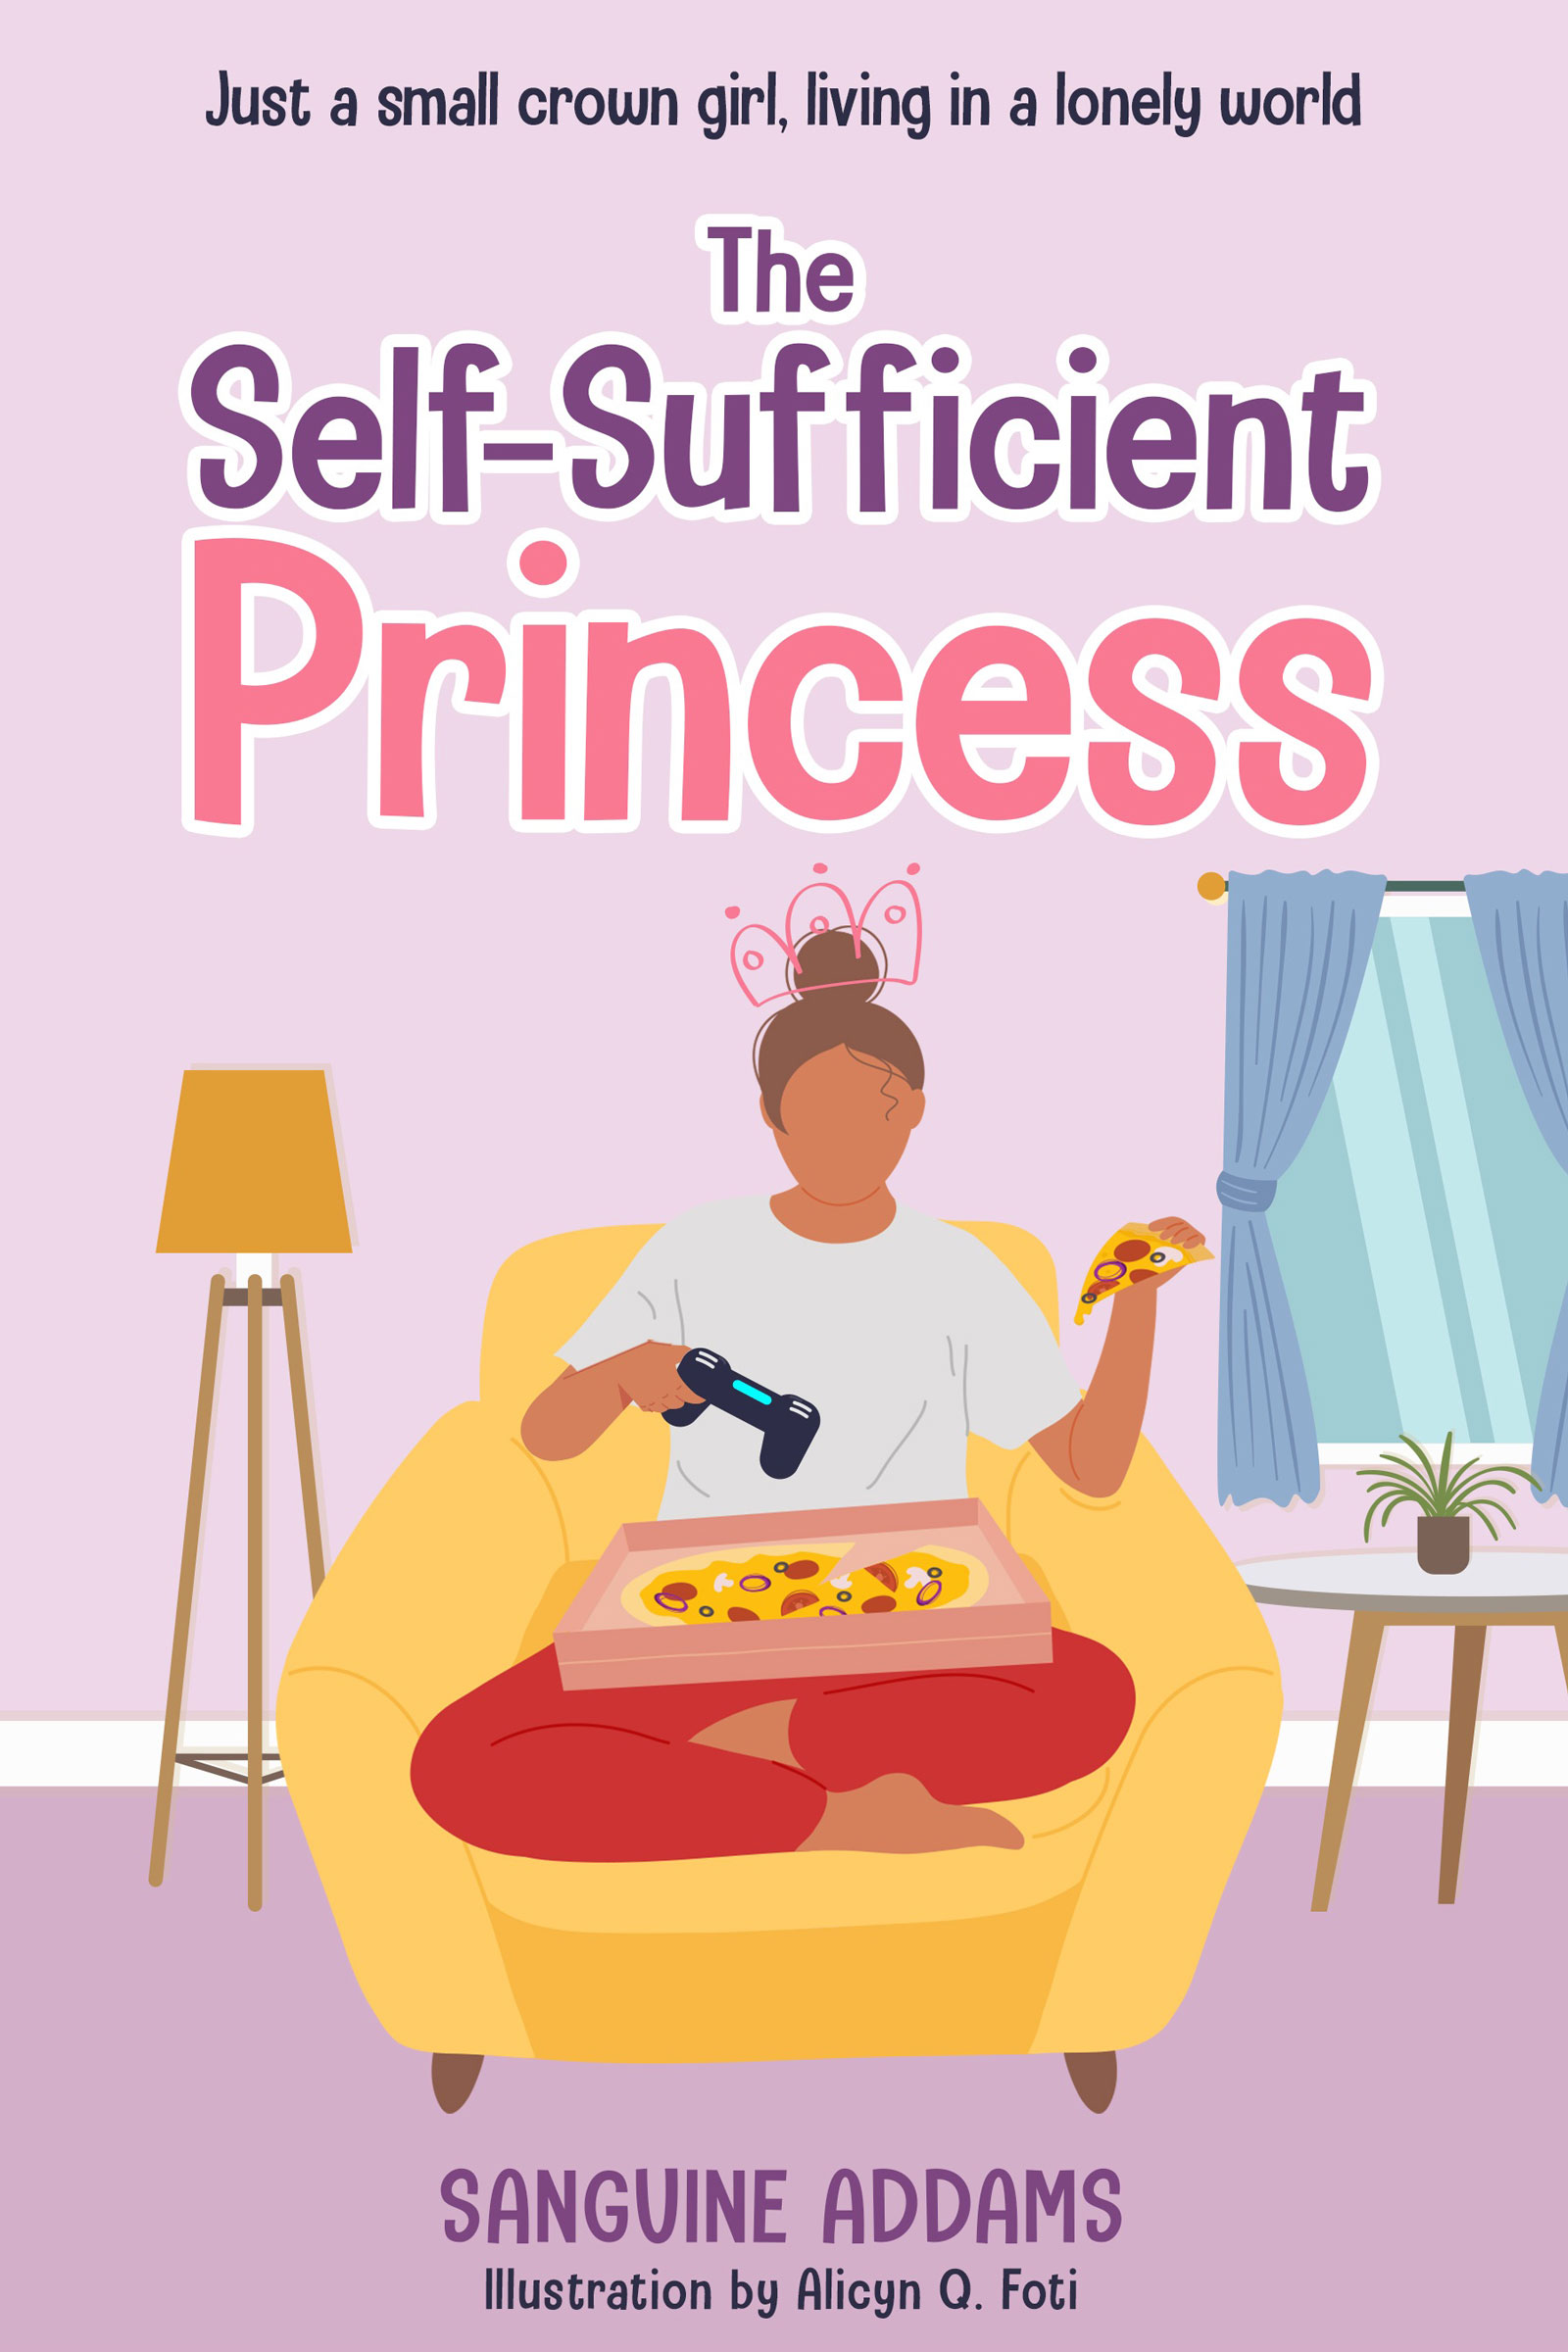 The Self-Sufficient Princess book cover.